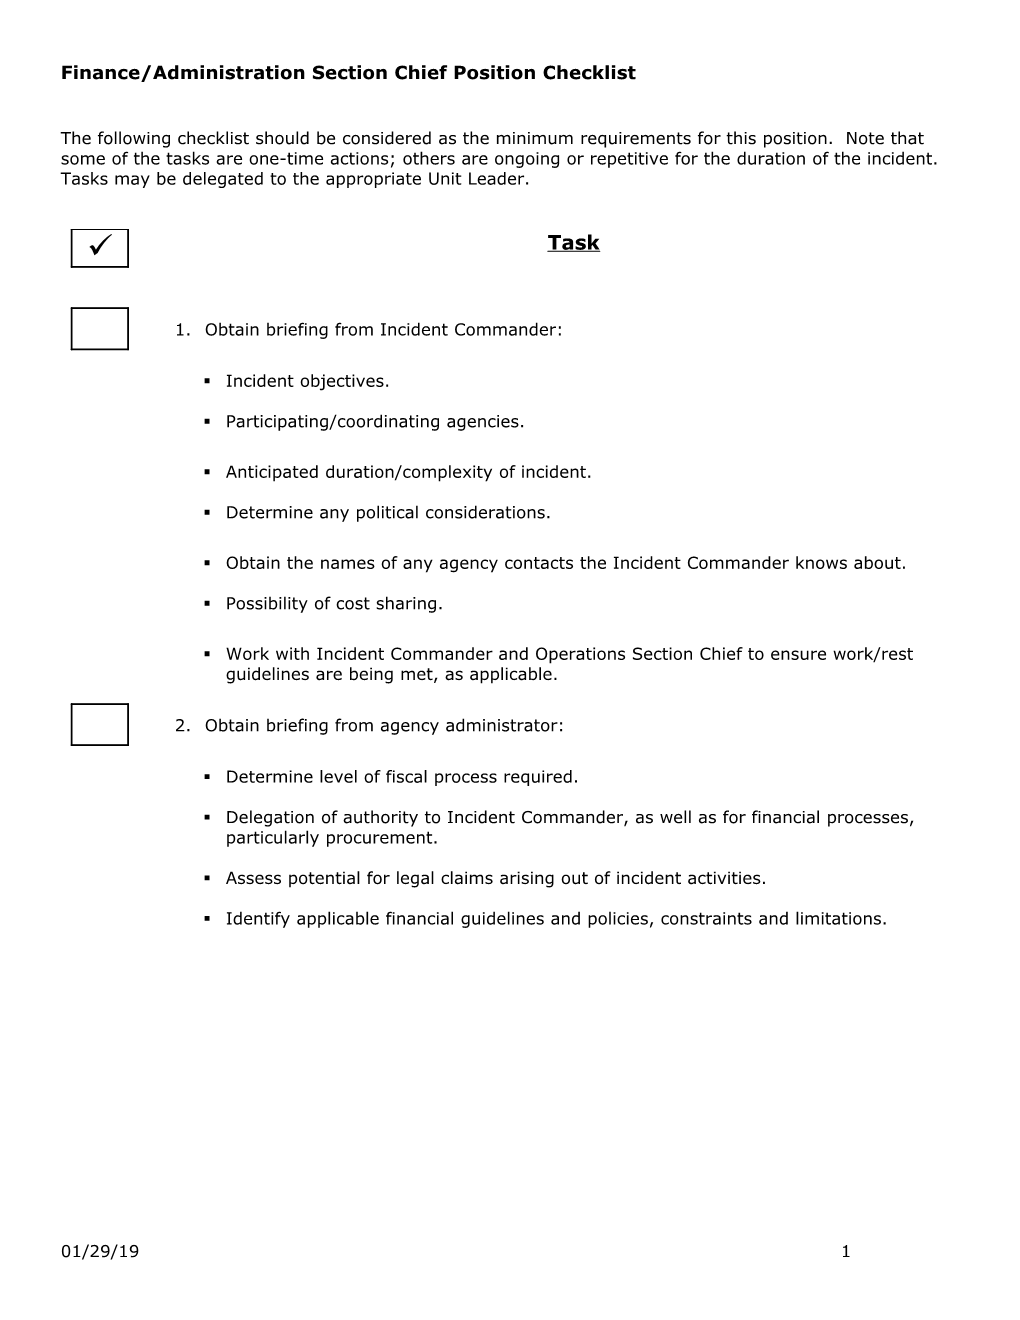 Finance/Administration Section Chief Position Checklist